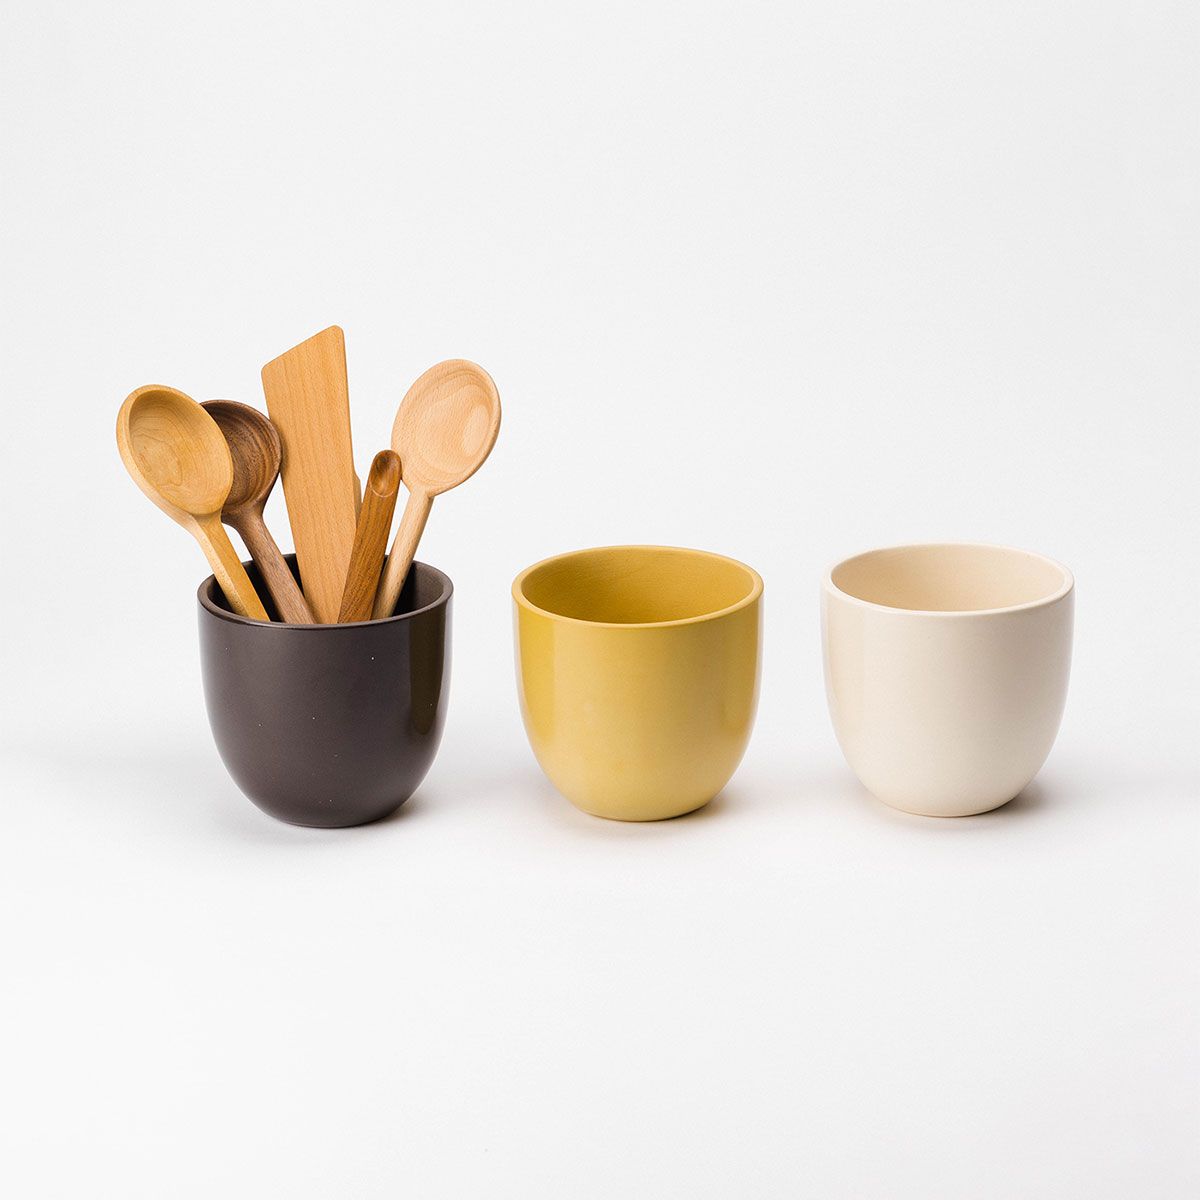 Three ceramic utensil crocks sit in a row upon a white backdrop, left to right: Woods (brown), Pollen (yellow), and Natural (cream). The brown utensil crock on the left holds various wooden utensils.